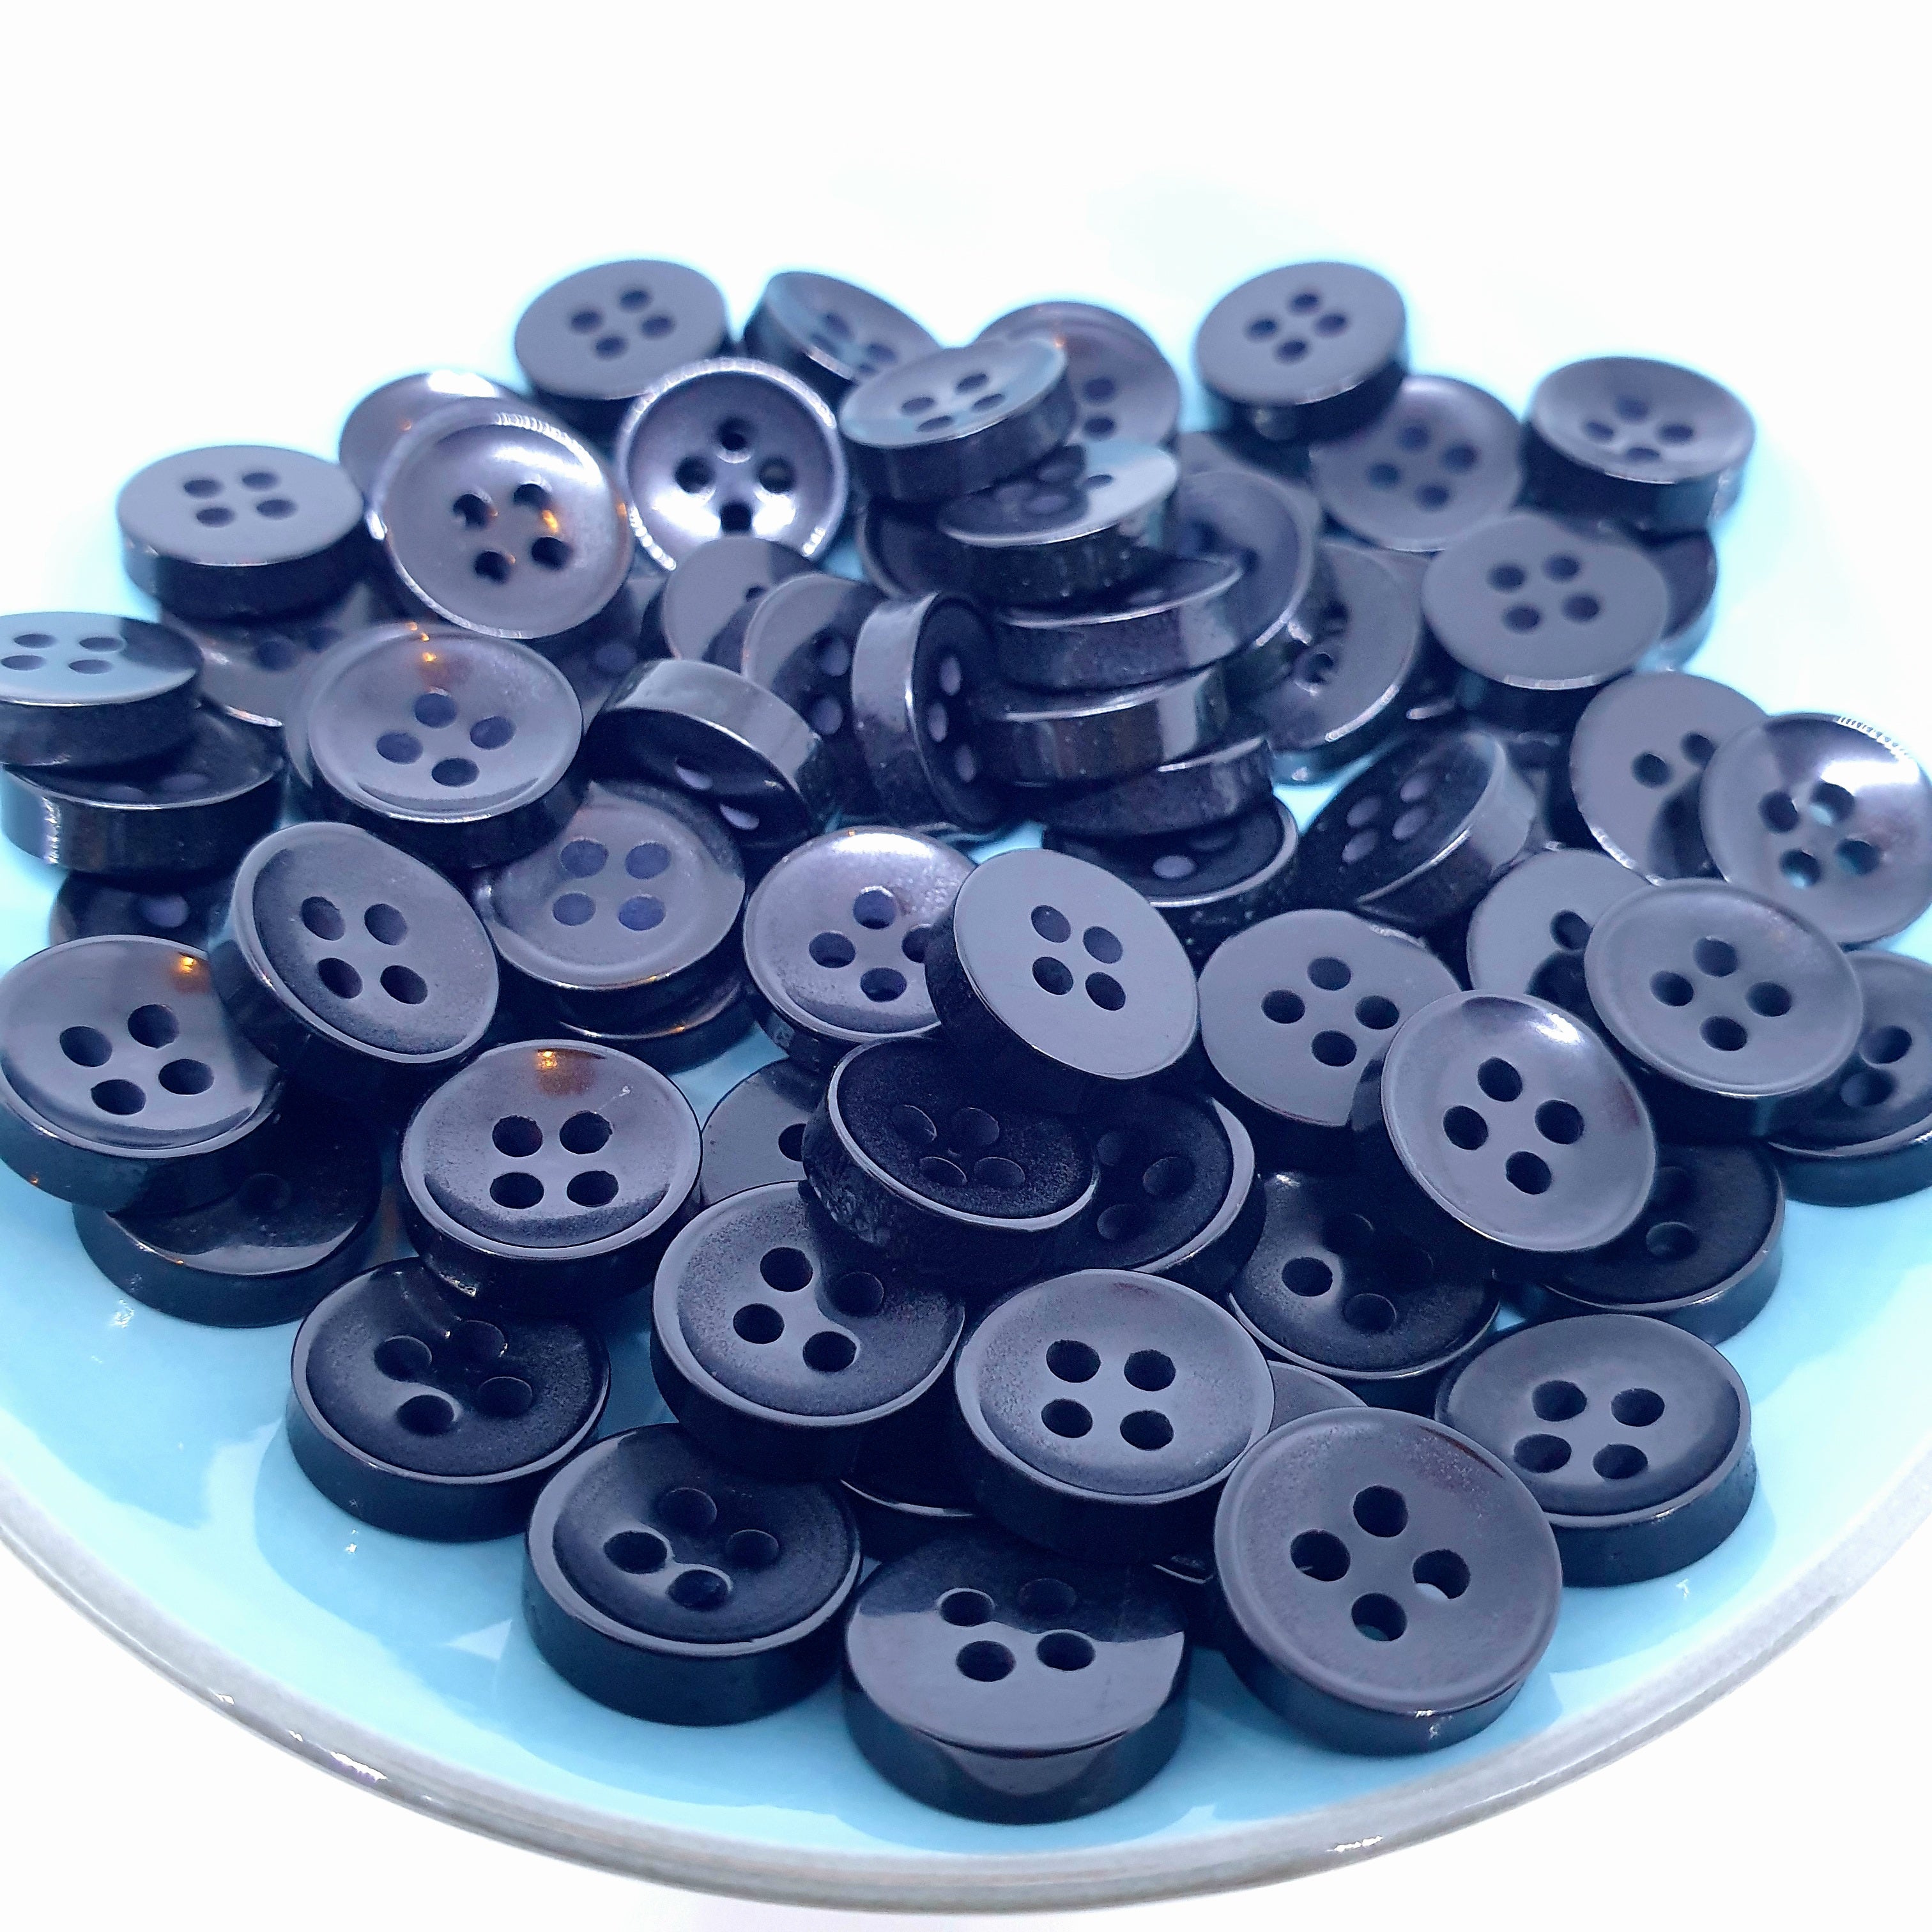 MajorCrafts 80pcs 11.5mm Black Pearlescent 4 Holes High-Grade Round Resin Small Sewing Buttons